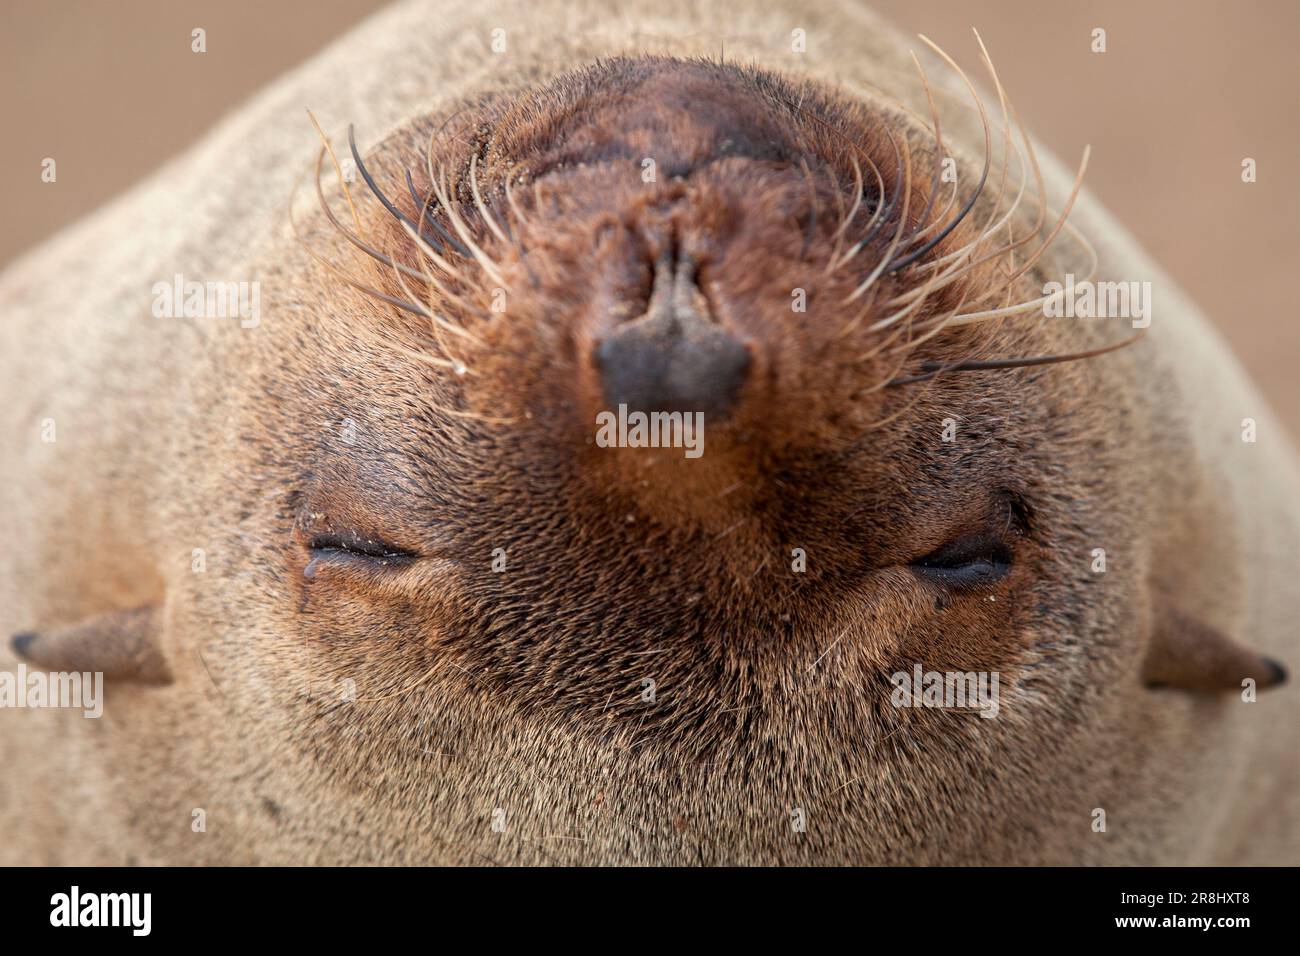 Portrait of a brown fur seal (Arctocephalus pusillus) at the Cape Cross Seal Reserve on the Skeleton Coast in Namibia, South Africa Stock Photo